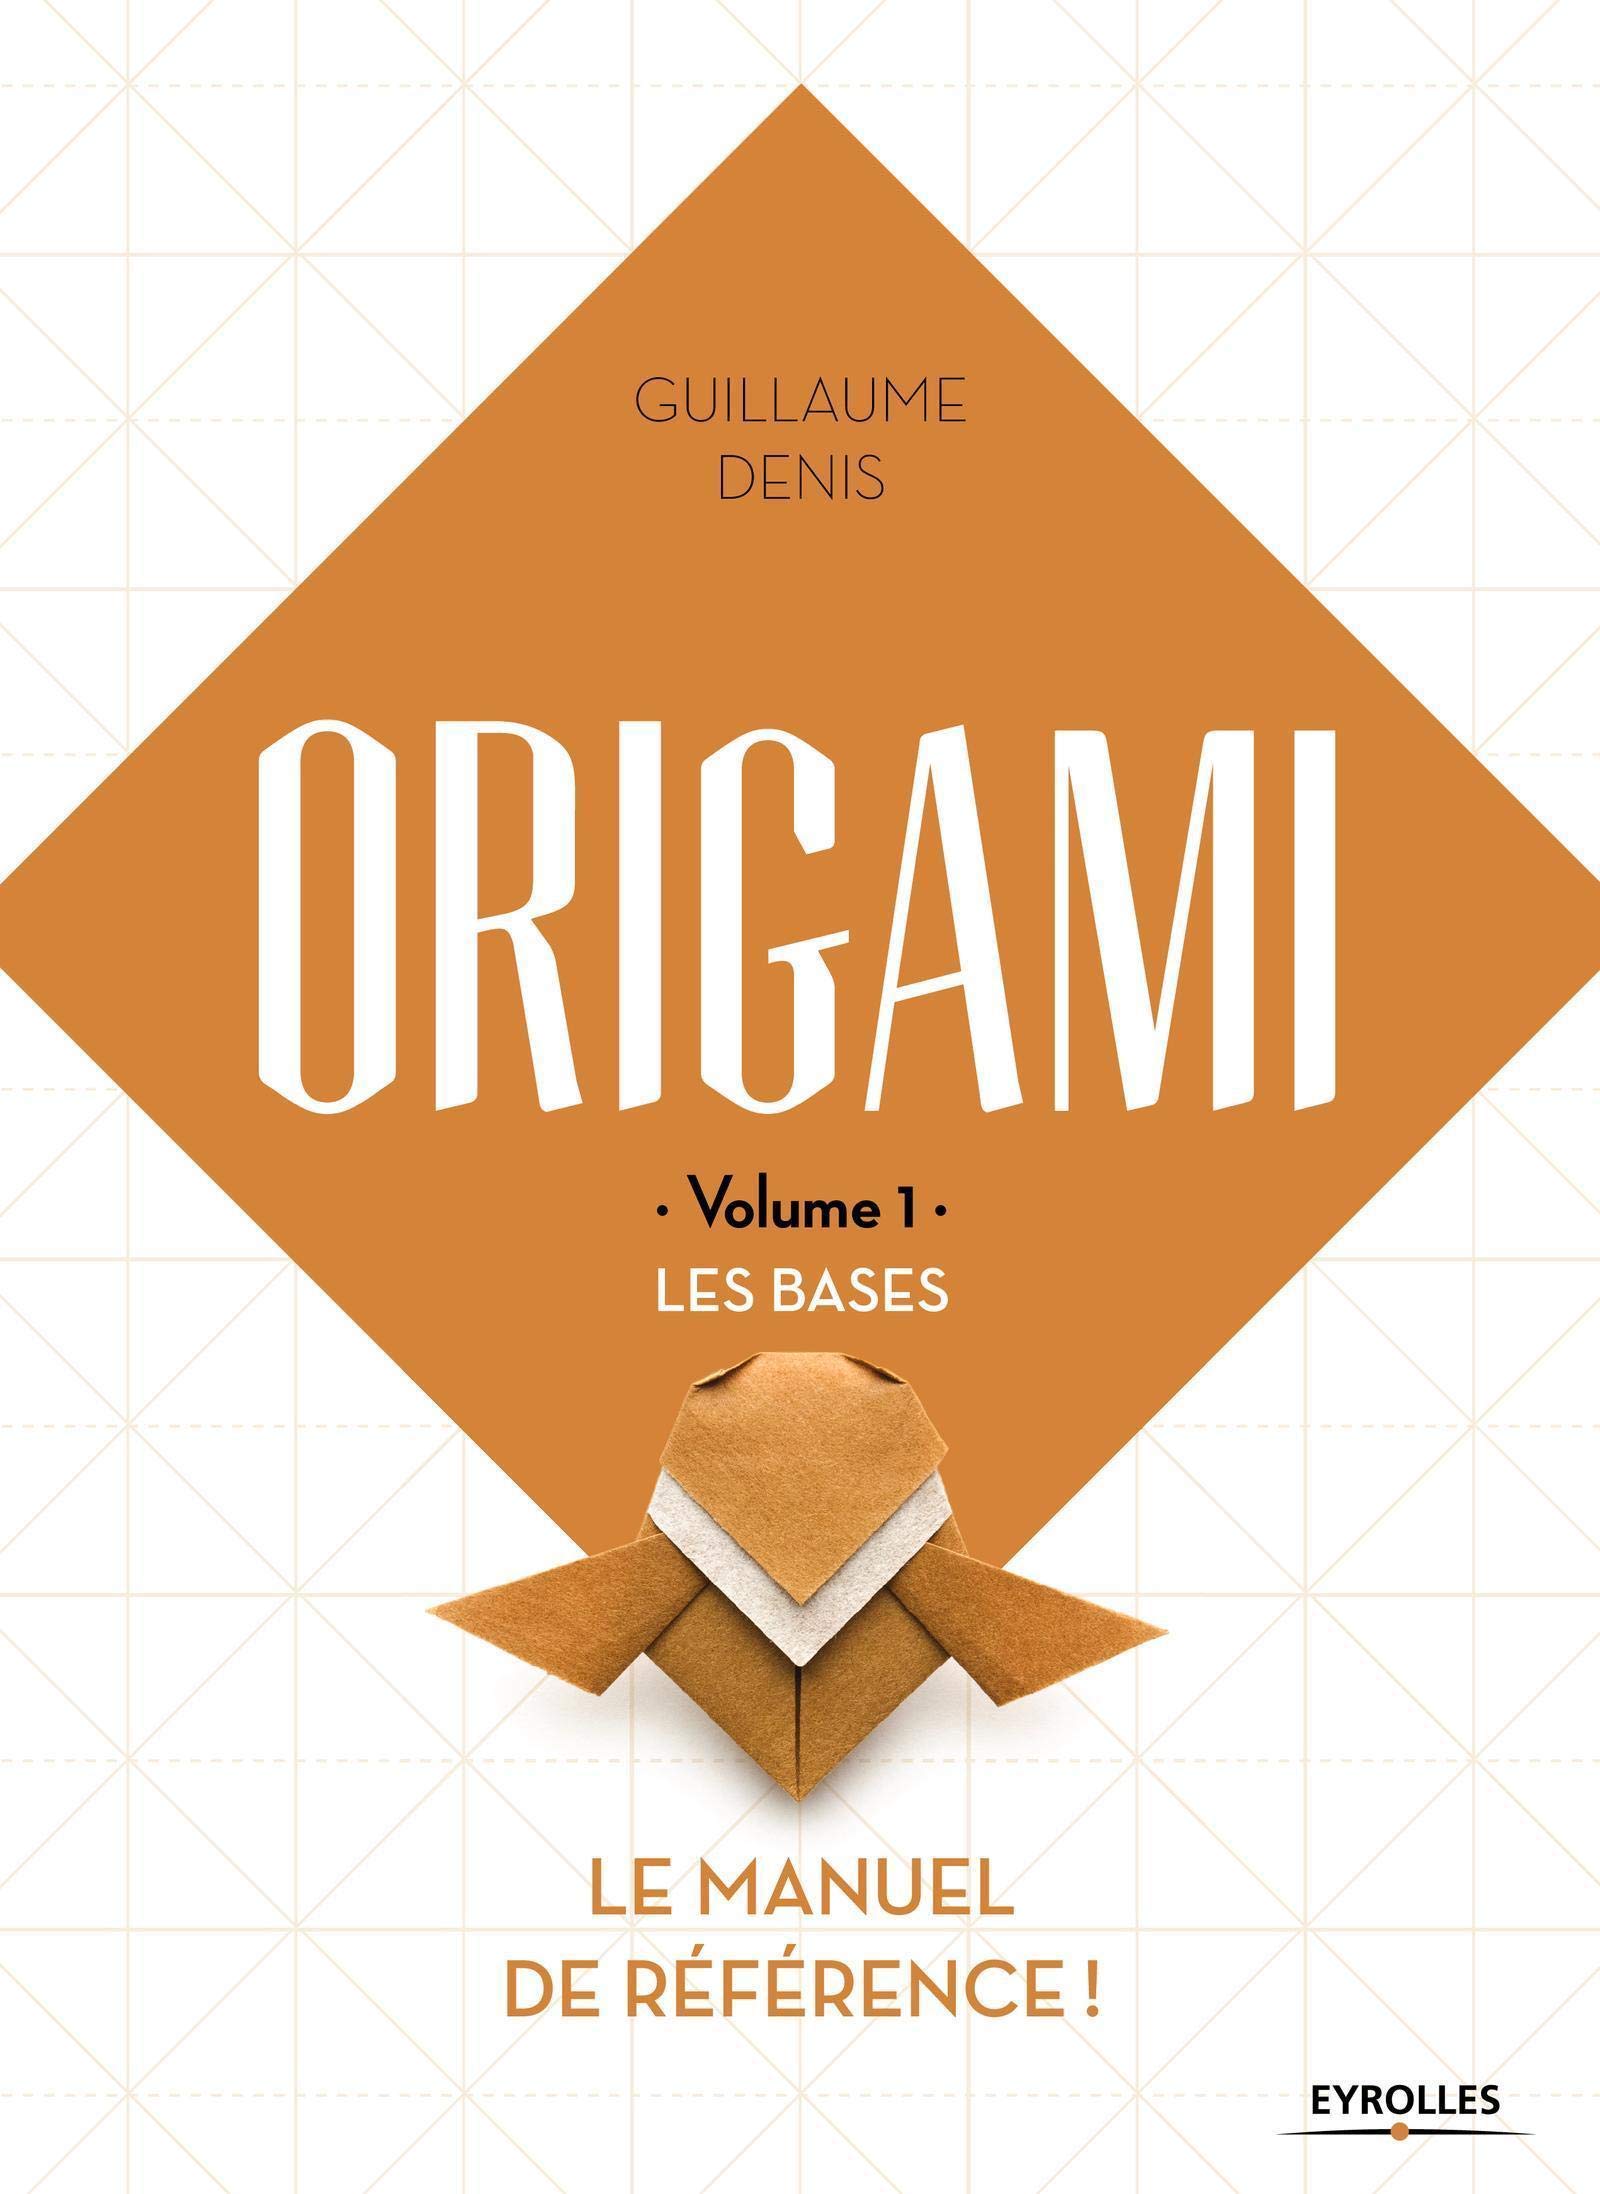 ORIGAMI - Volume 1 - LES BASES : page 68.